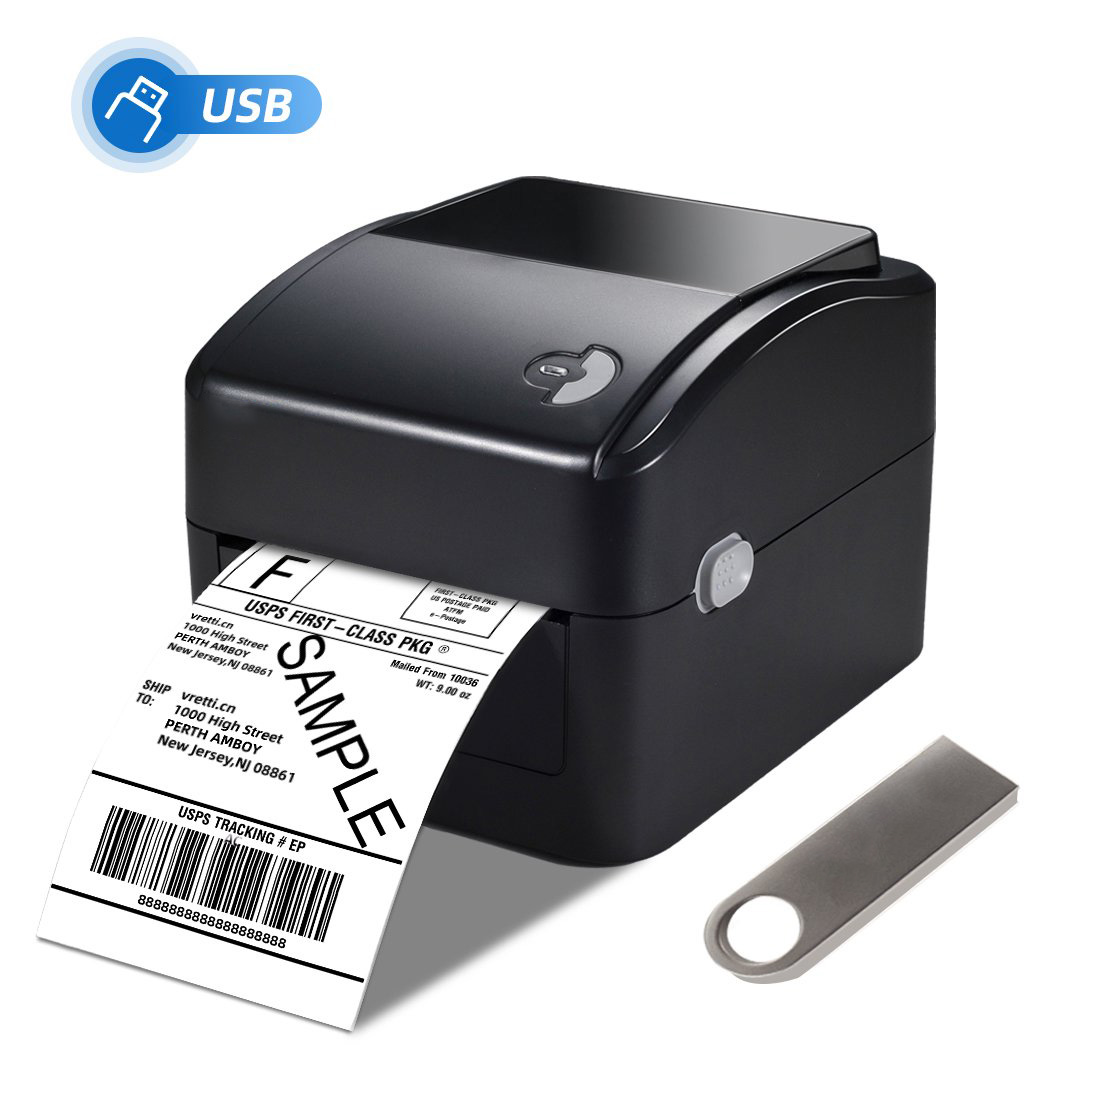 Black 4 x 6 Thermal Shipping Label Printer, Label Printer for Shipping Packages, Compatible with Shopify, USPS, Fedex.